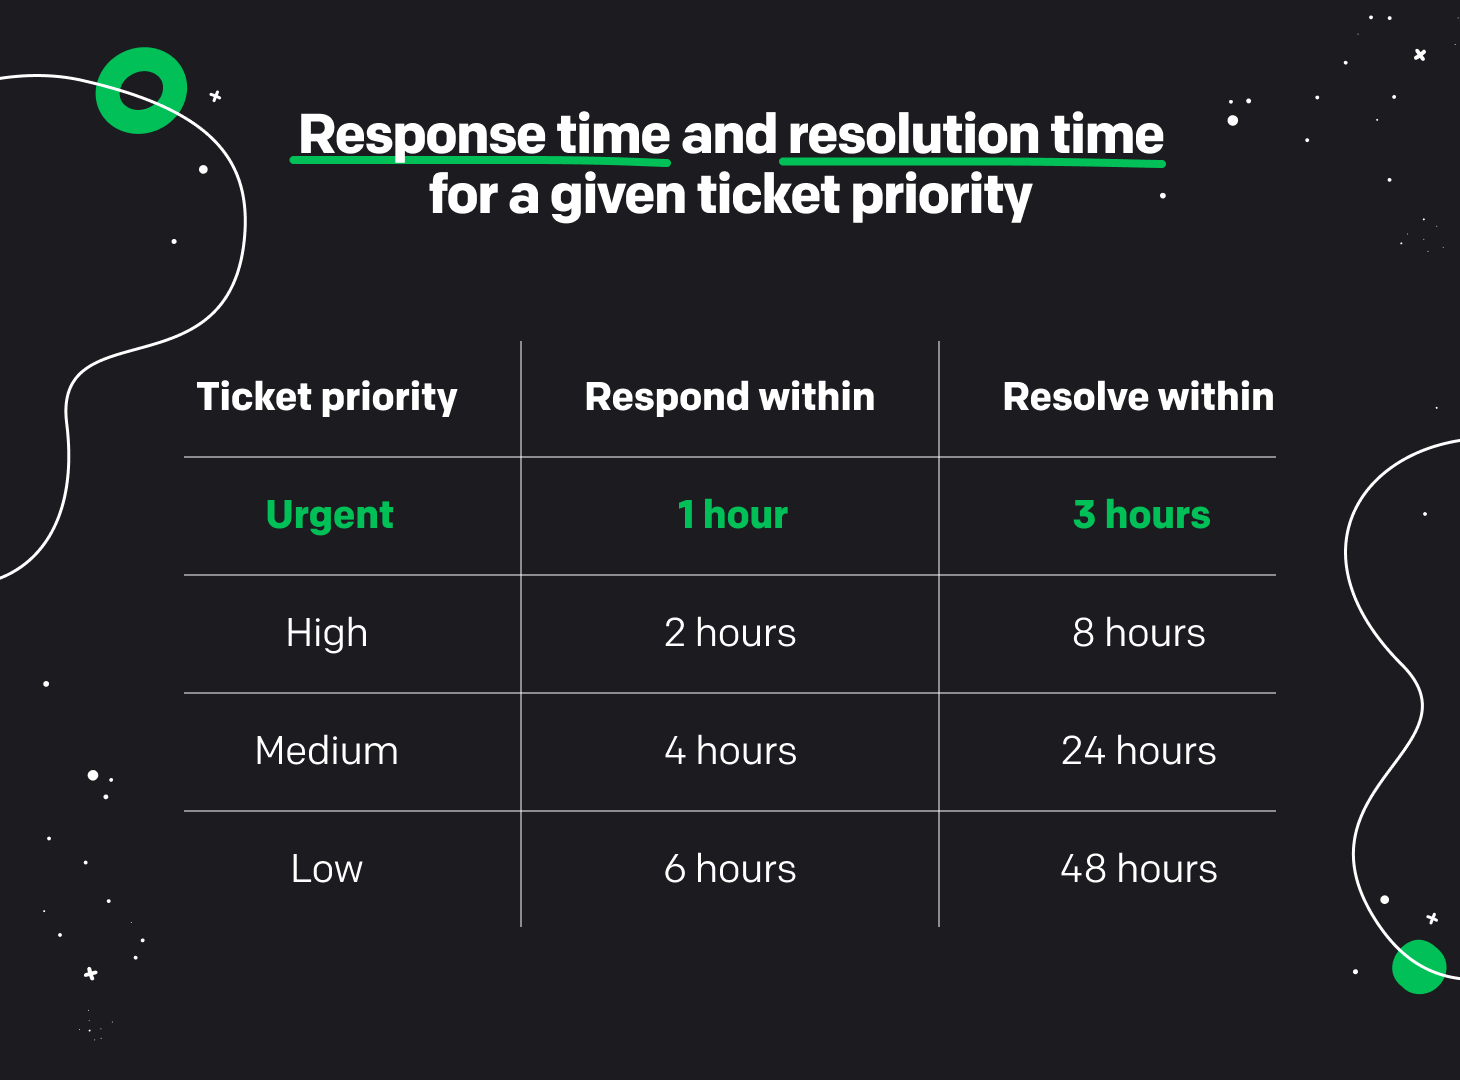 Example of response and resolution time for a given ticket priority.